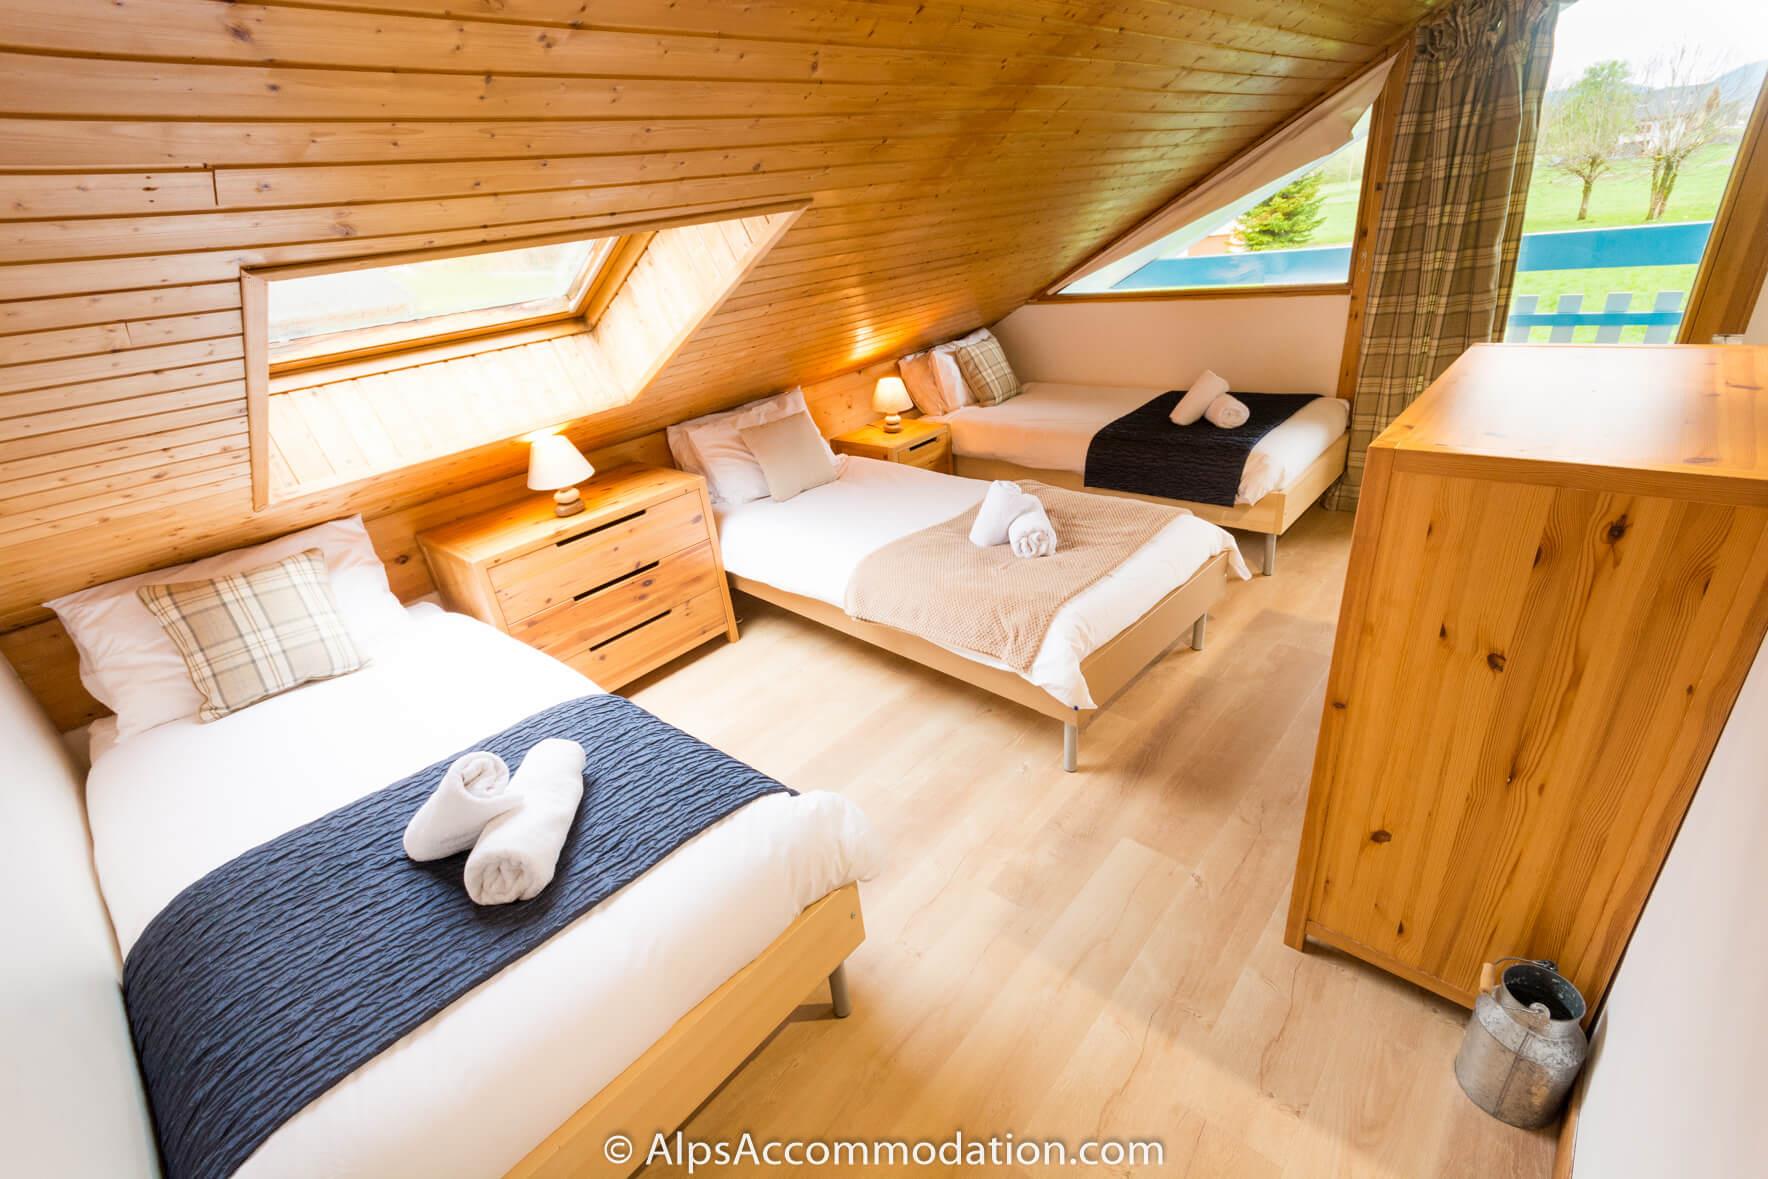 Chalet Bleu Morillon - Triple bedroom with balcony access and amazing views